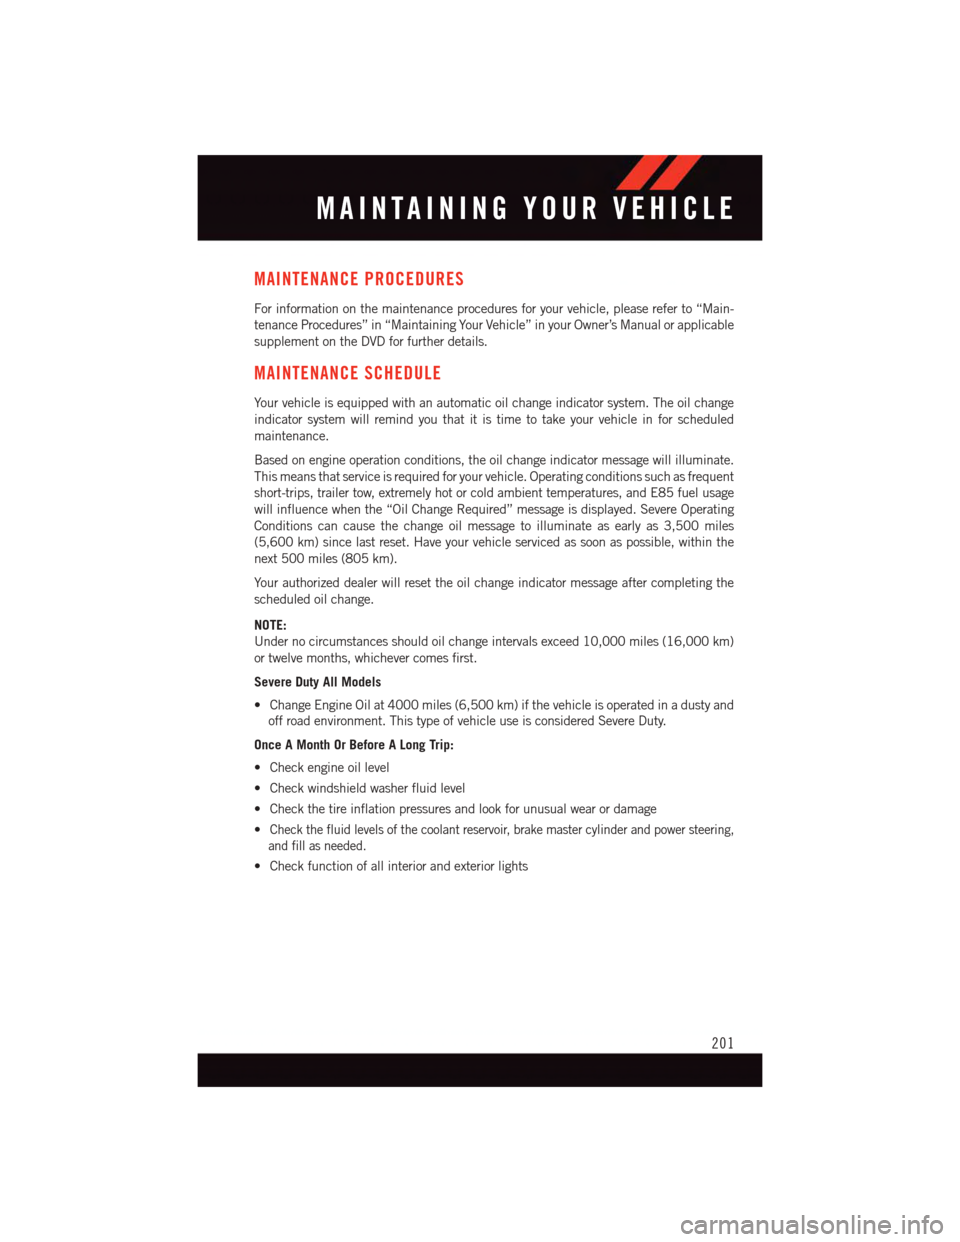 DODGE DURANGO 2015 3.G User Guide MAINTENANCE PROCEDURES
For information on the maintenance procedures for your vehicle, please refer to “Main-
tenance Procedures” in “Maintaining Your Vehicle” in your Owner’s Manual or appl